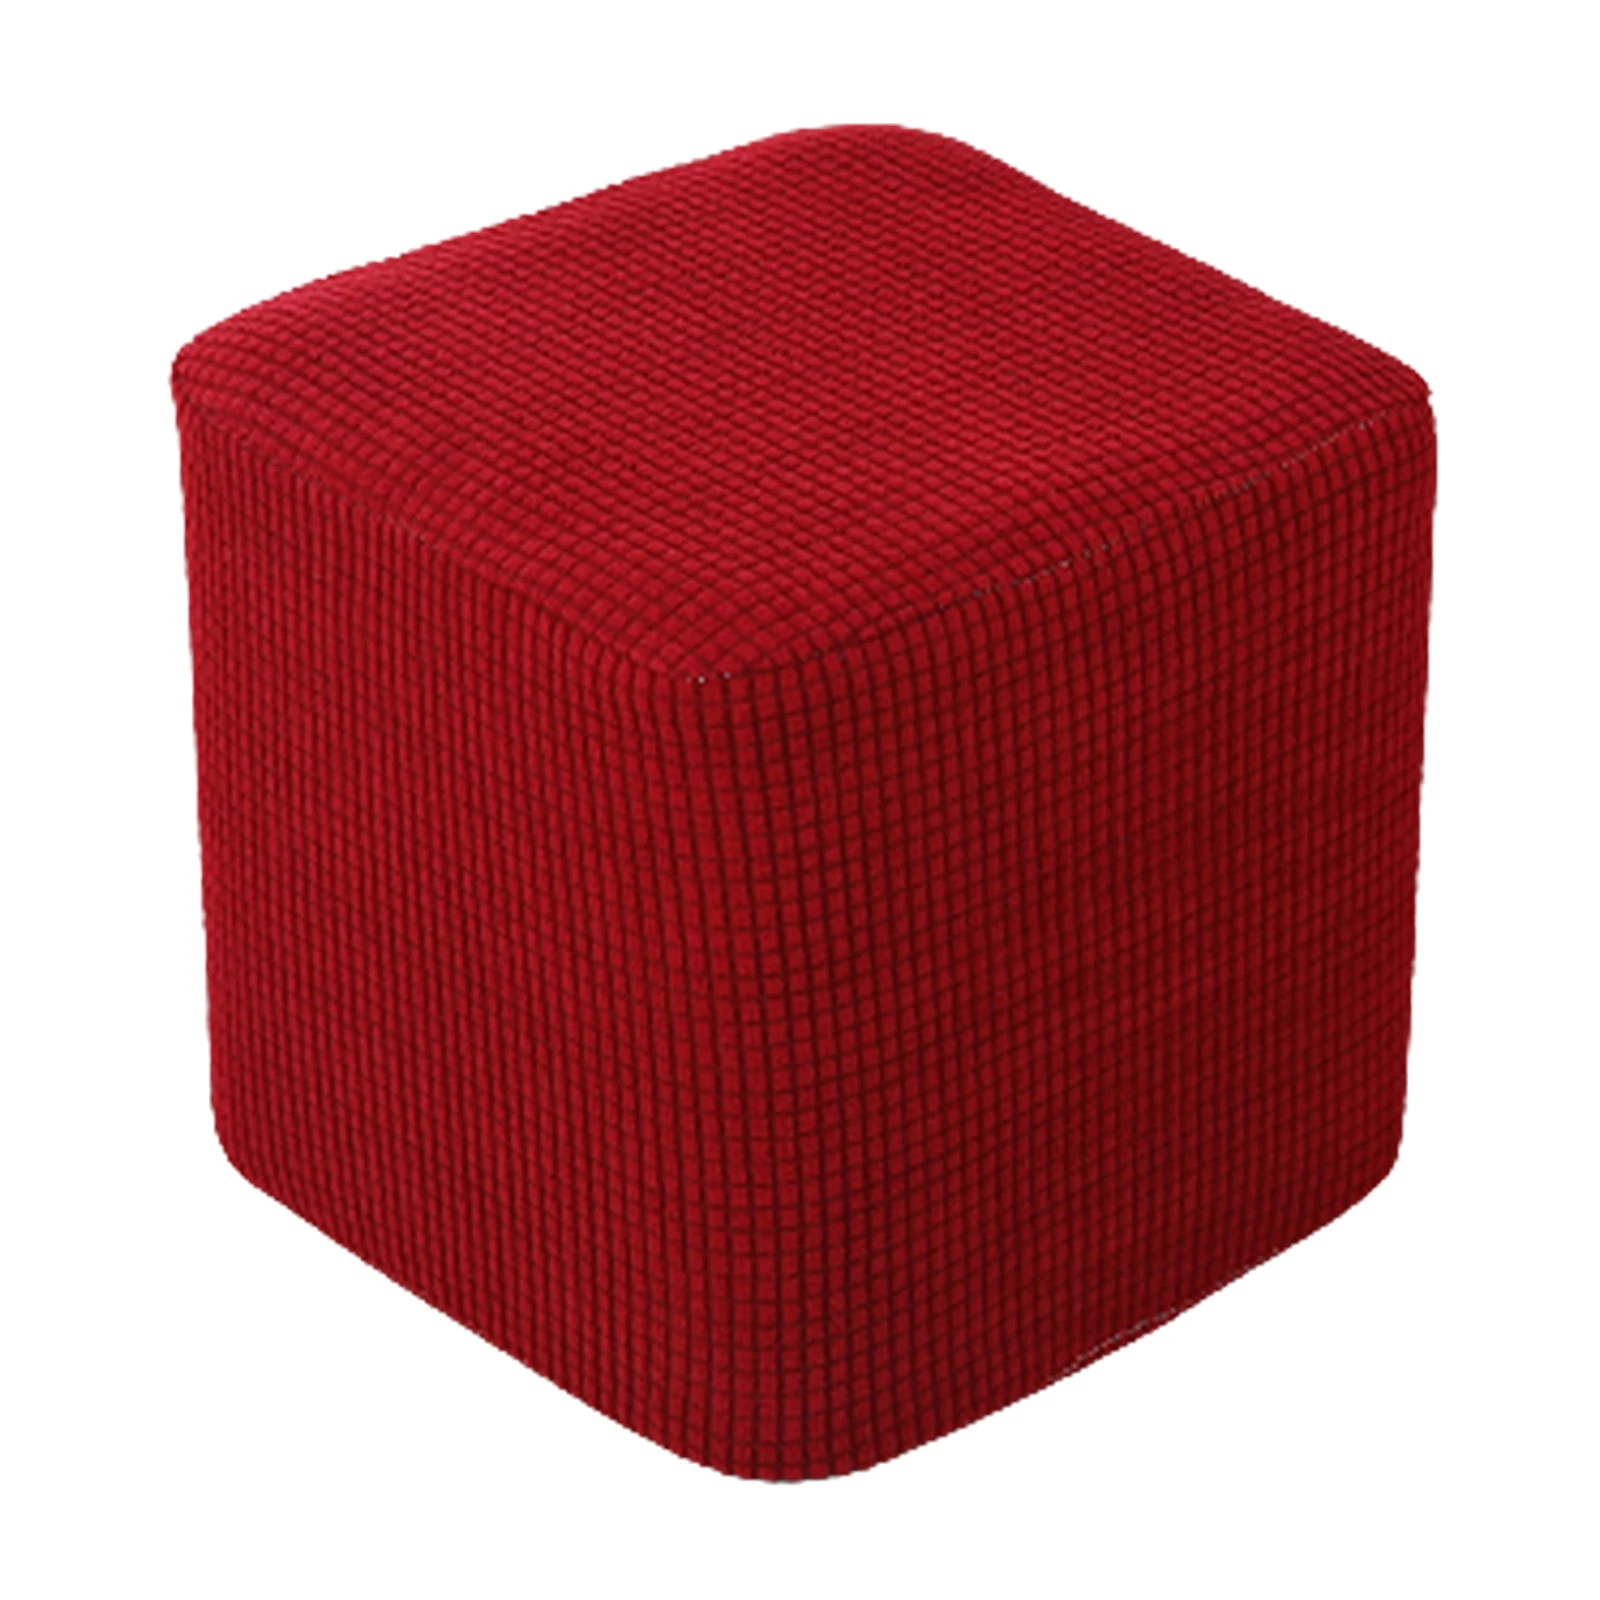 Stretch Footstool SlipCover Soft Rectangle Ottoman Cover with Elastic Furniture